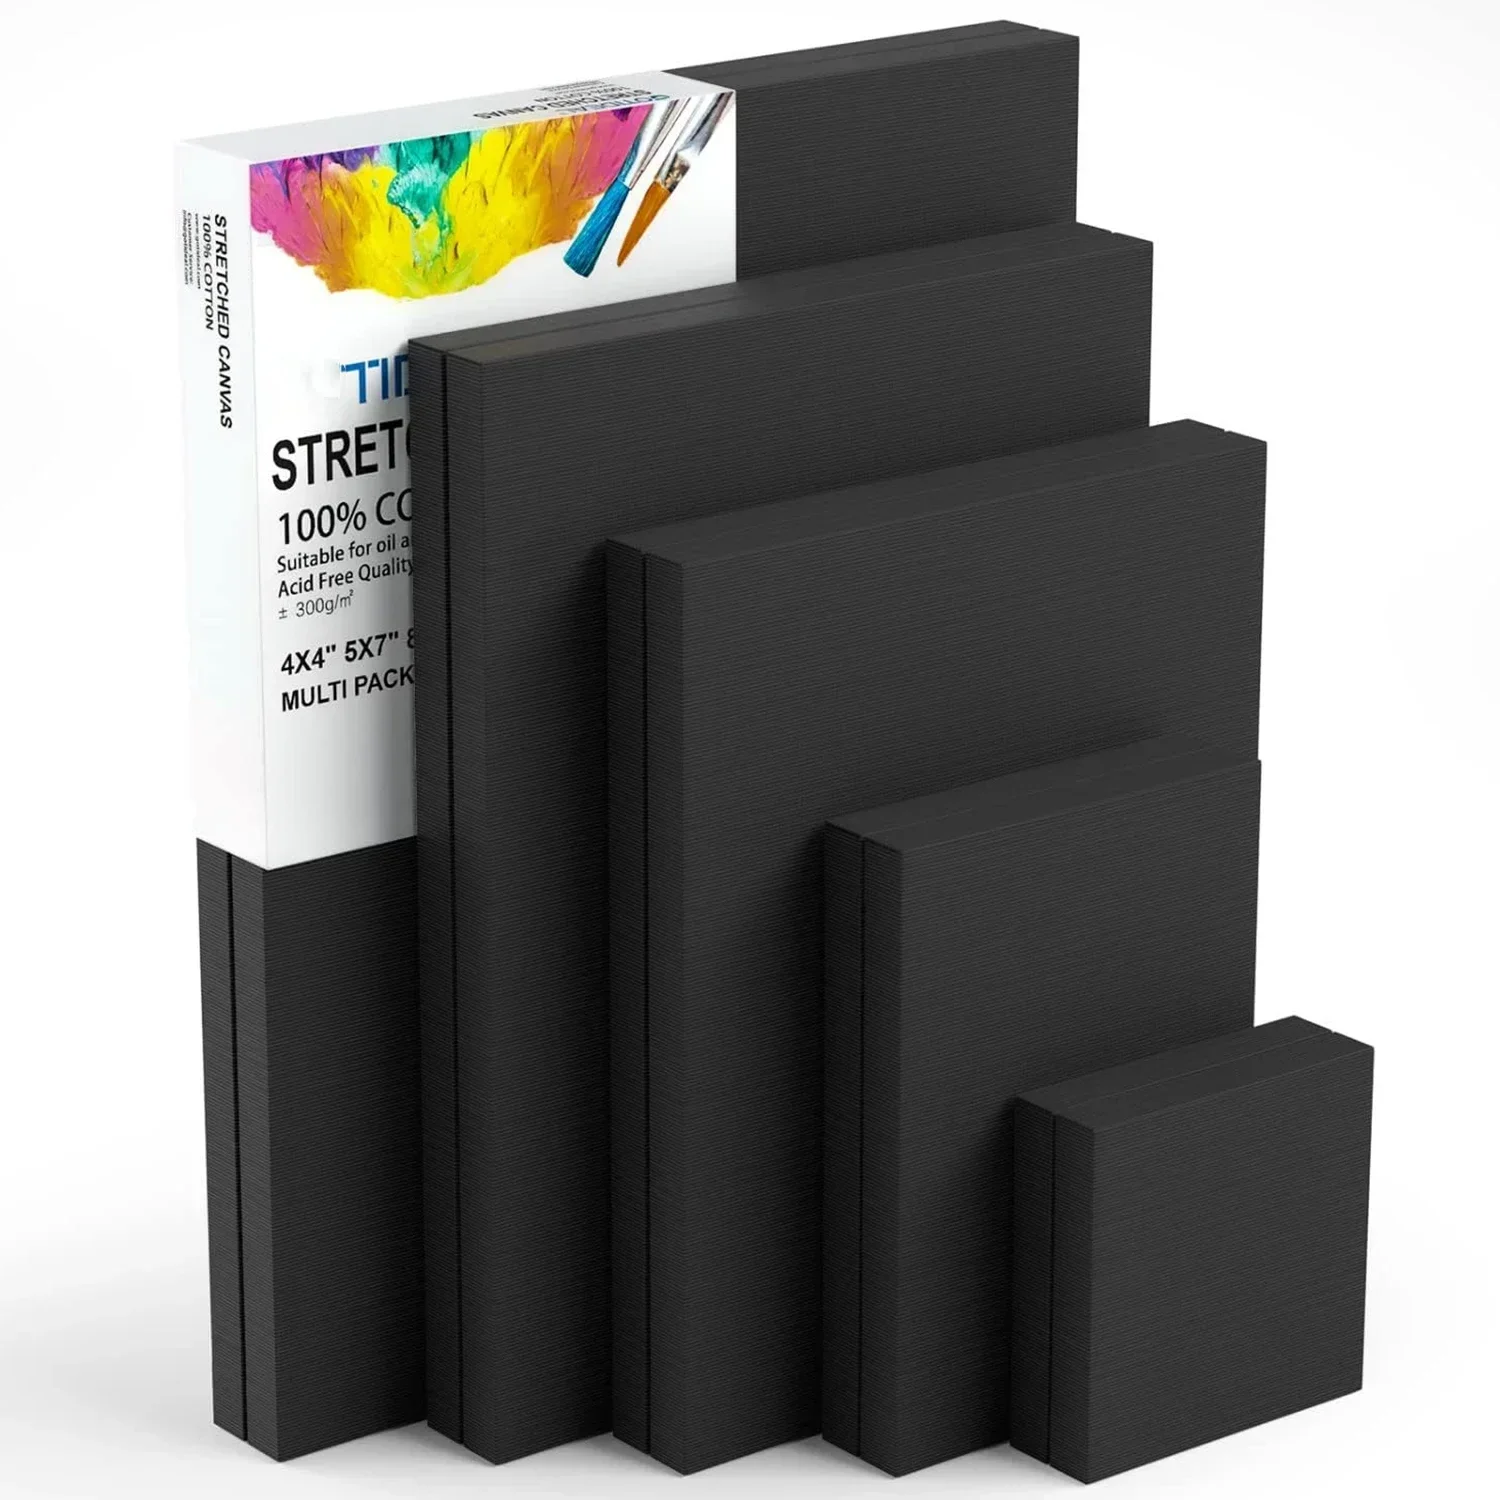 

8 Pcs Black Stretched Canvases for Painting Primed 100% Cotton Artist Blank Canvas Boards for Painting Acrylic Pouring Oil Paint